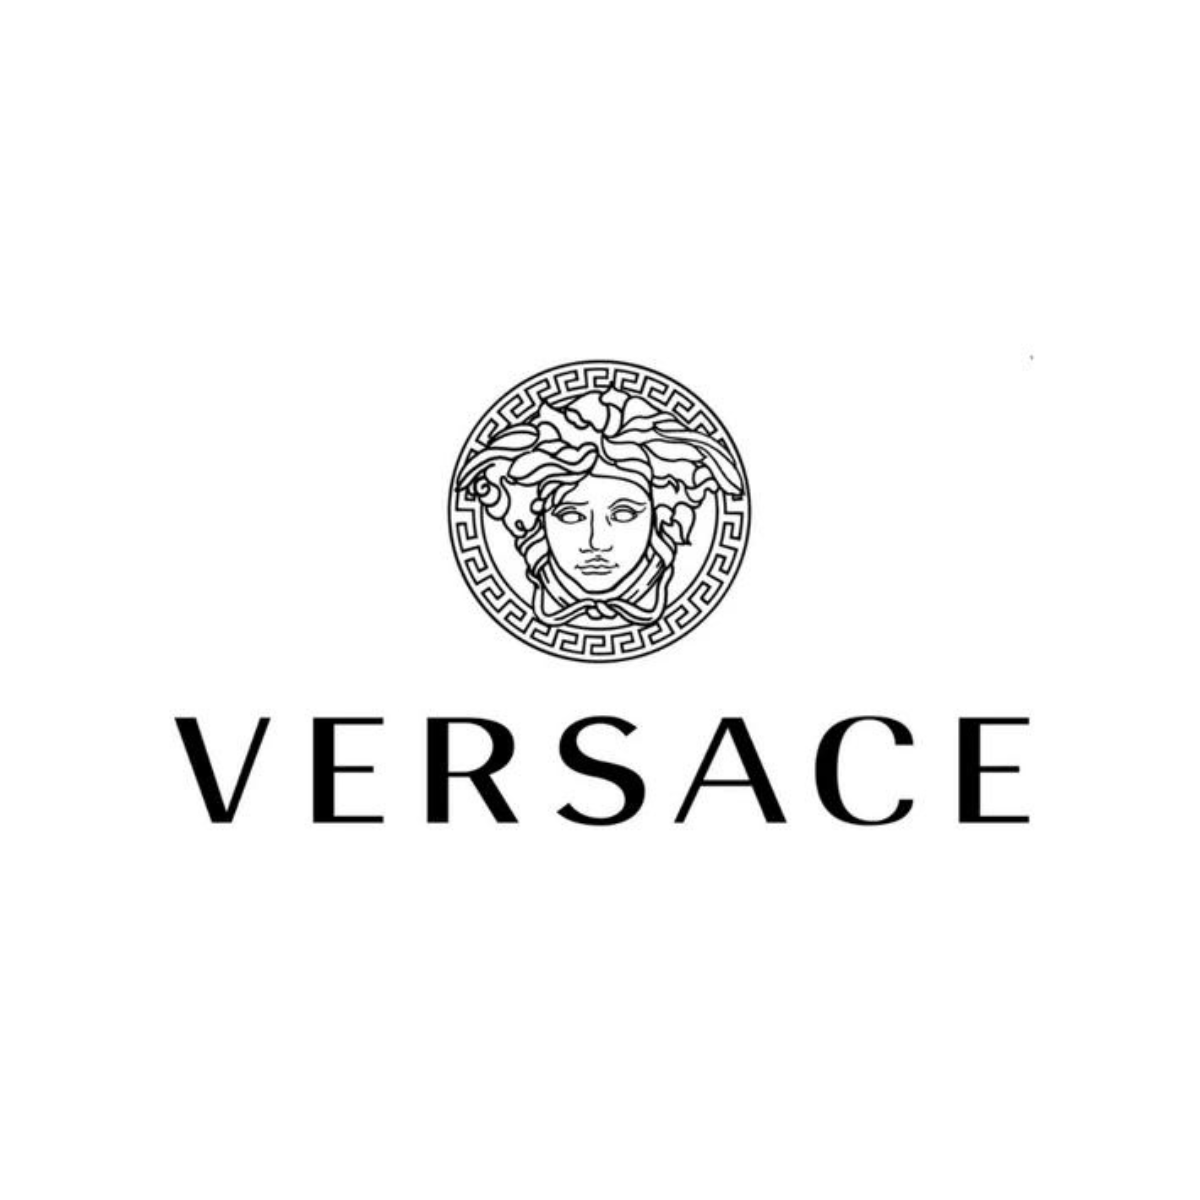 "Versace Eyewear Collection at Optorium: Authentic sunglasses and frames for men and women, featuring iconic designs. Enjoy free shipping on genuine products."